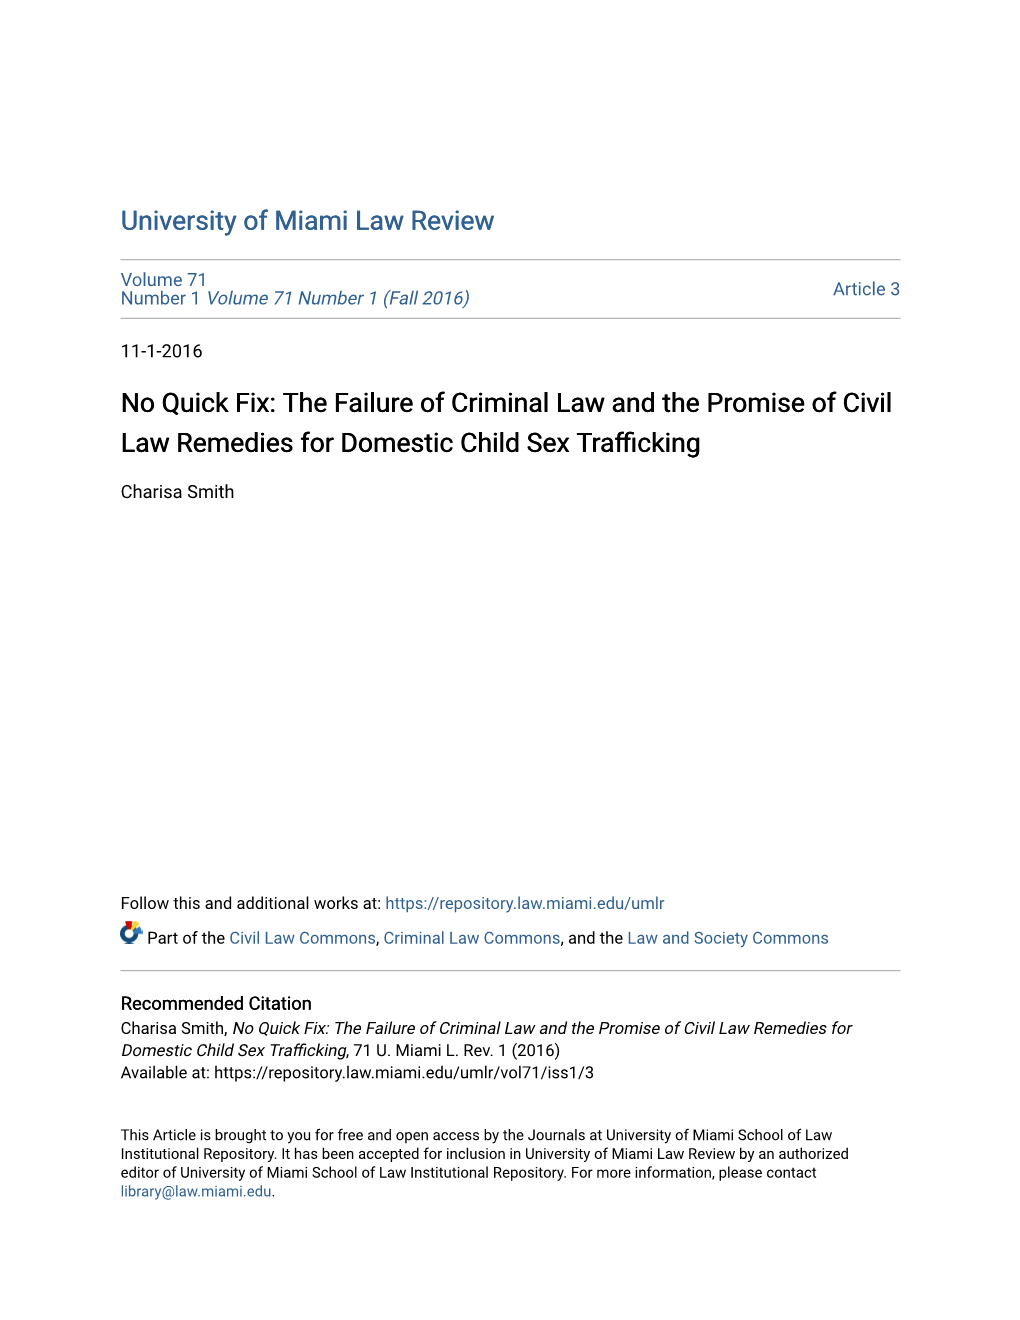 No Quick Fix: the Failure of Criminal Law and the Promise of Civil Law Remedies for Domestic Child Sex Trafficking